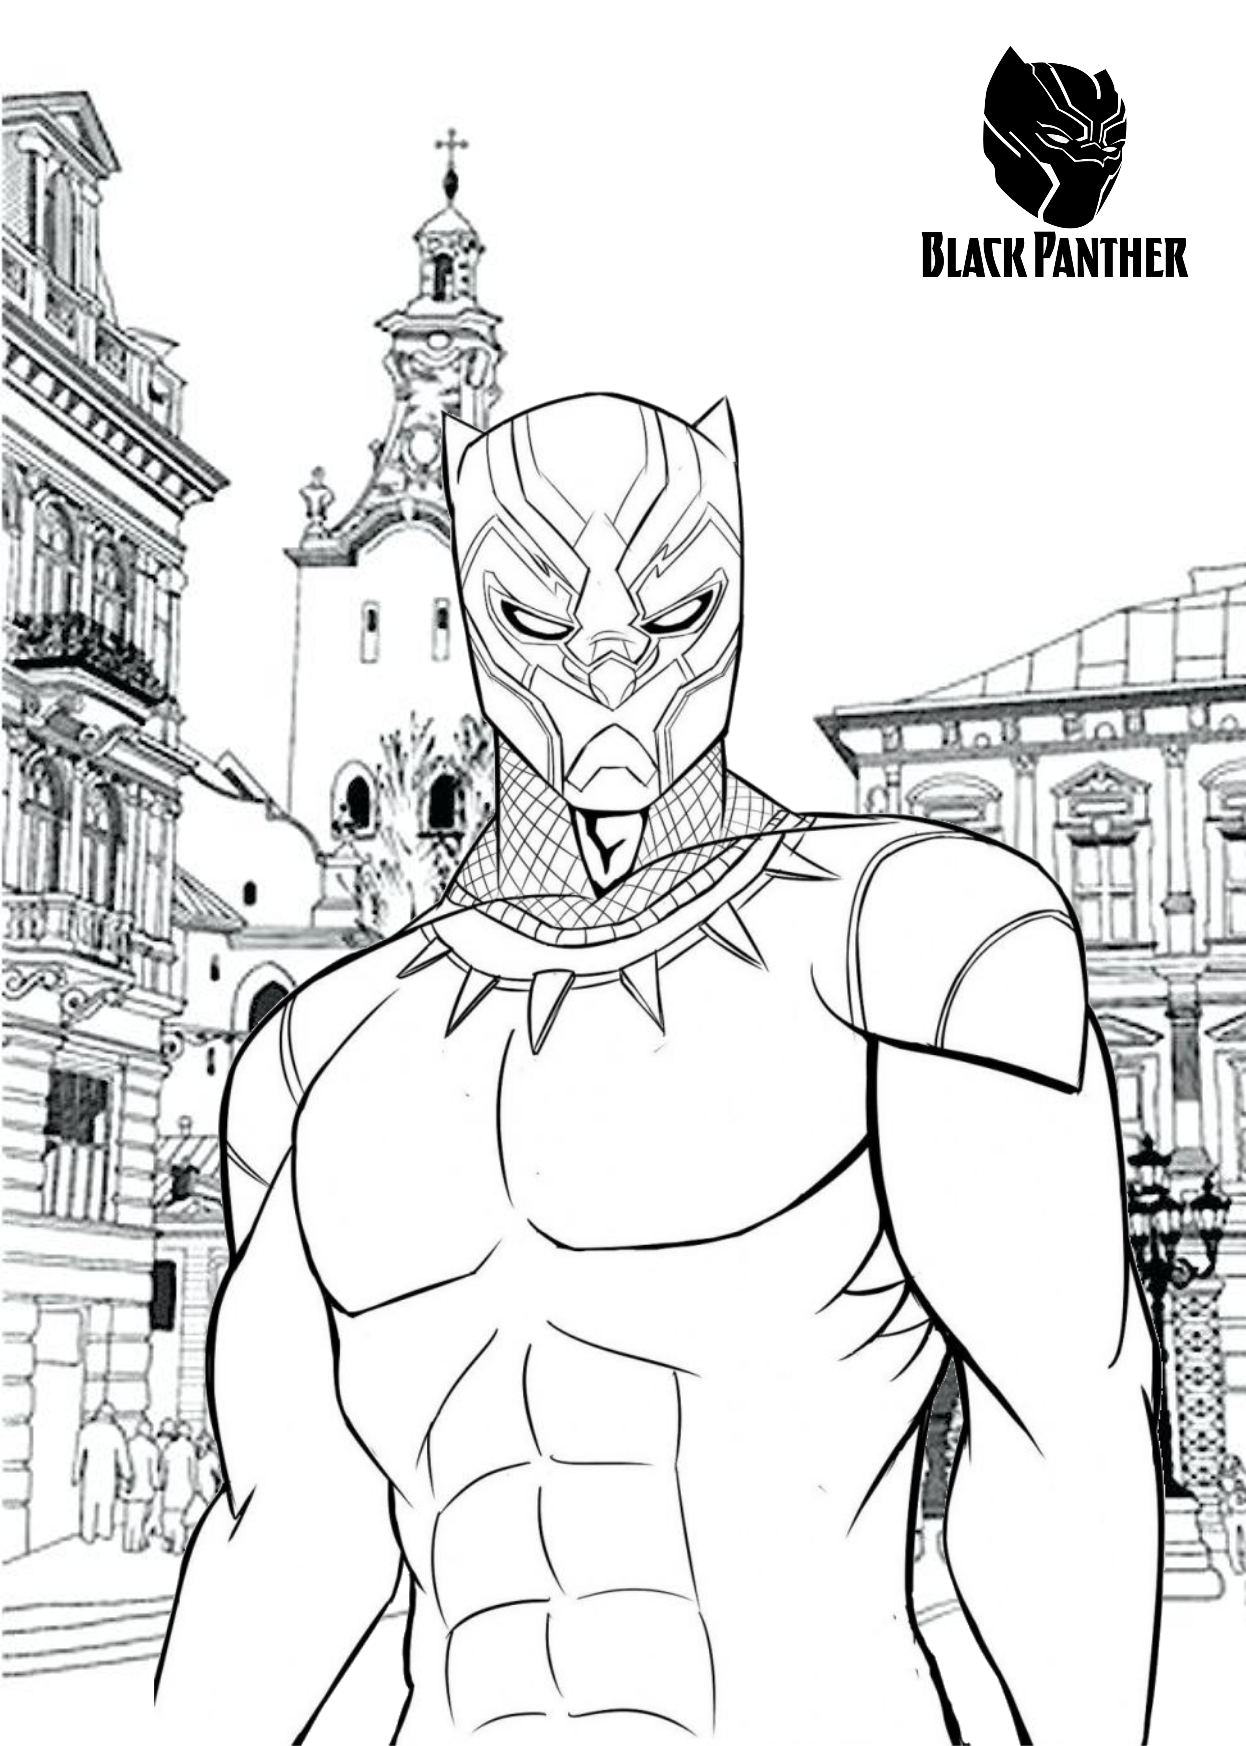 Black panther marvel comics character printable coloring pages on tsgos